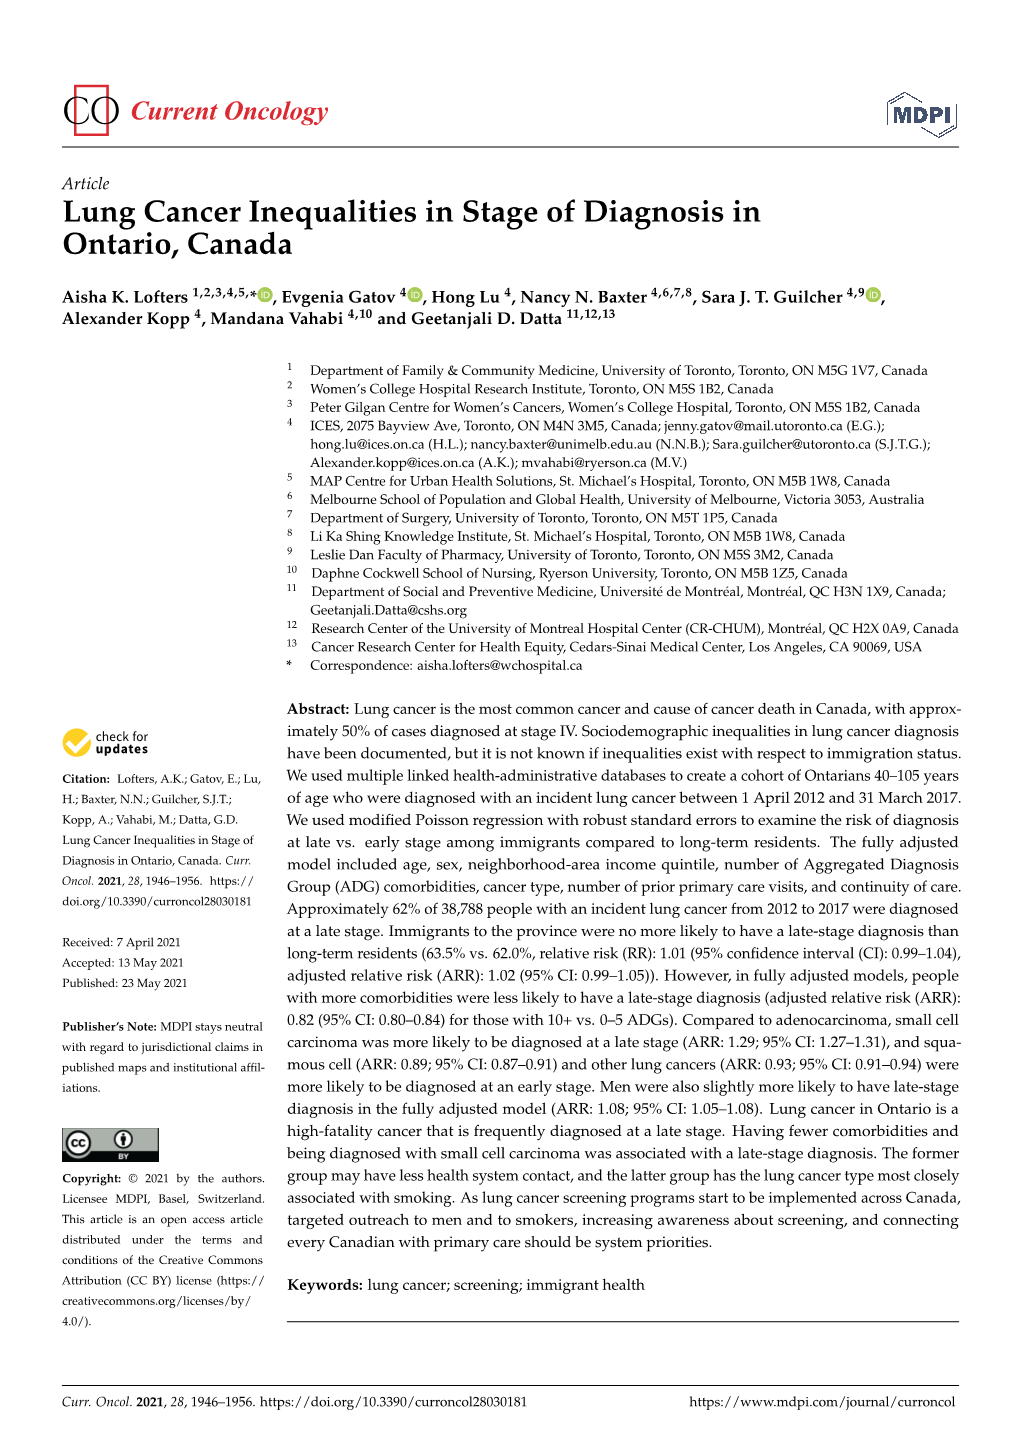 Lung Cancer Inequalities in Stage of Diagnosis in Ontario, Canada